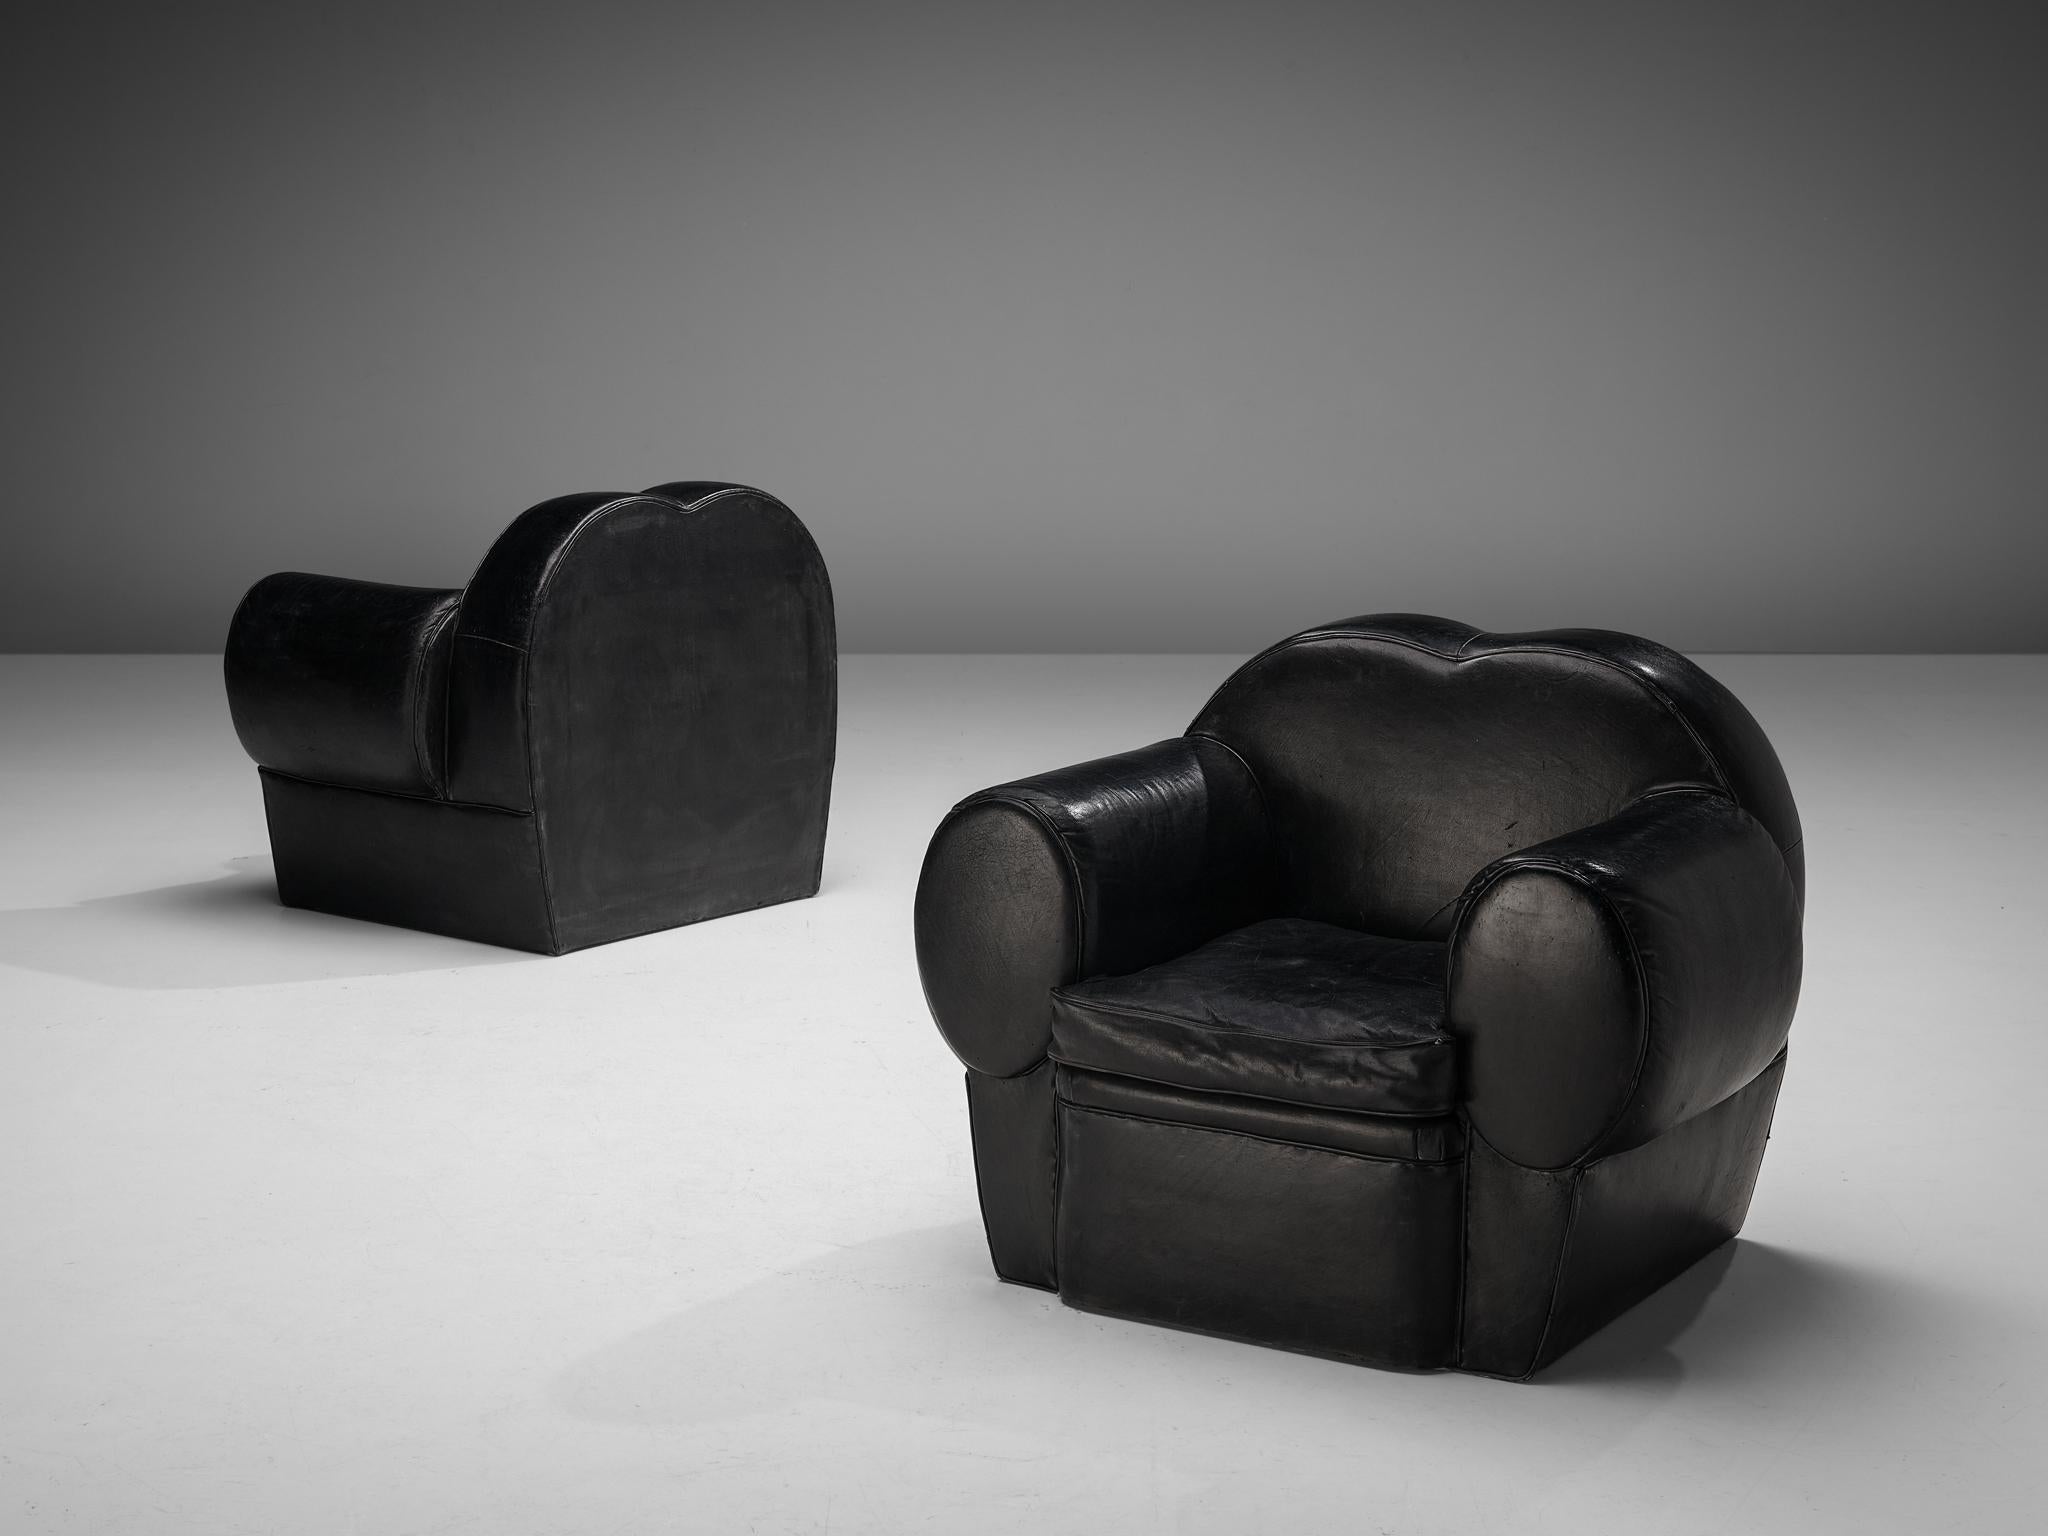 Pair of lounge chairs, leather, France, 1940s 

The designer of these lounge chairs embraced the stylistic traits of the Art Deco period of the 1930s and 1940s. The frame is composed of imposing curved lines and round edges, contributing to the